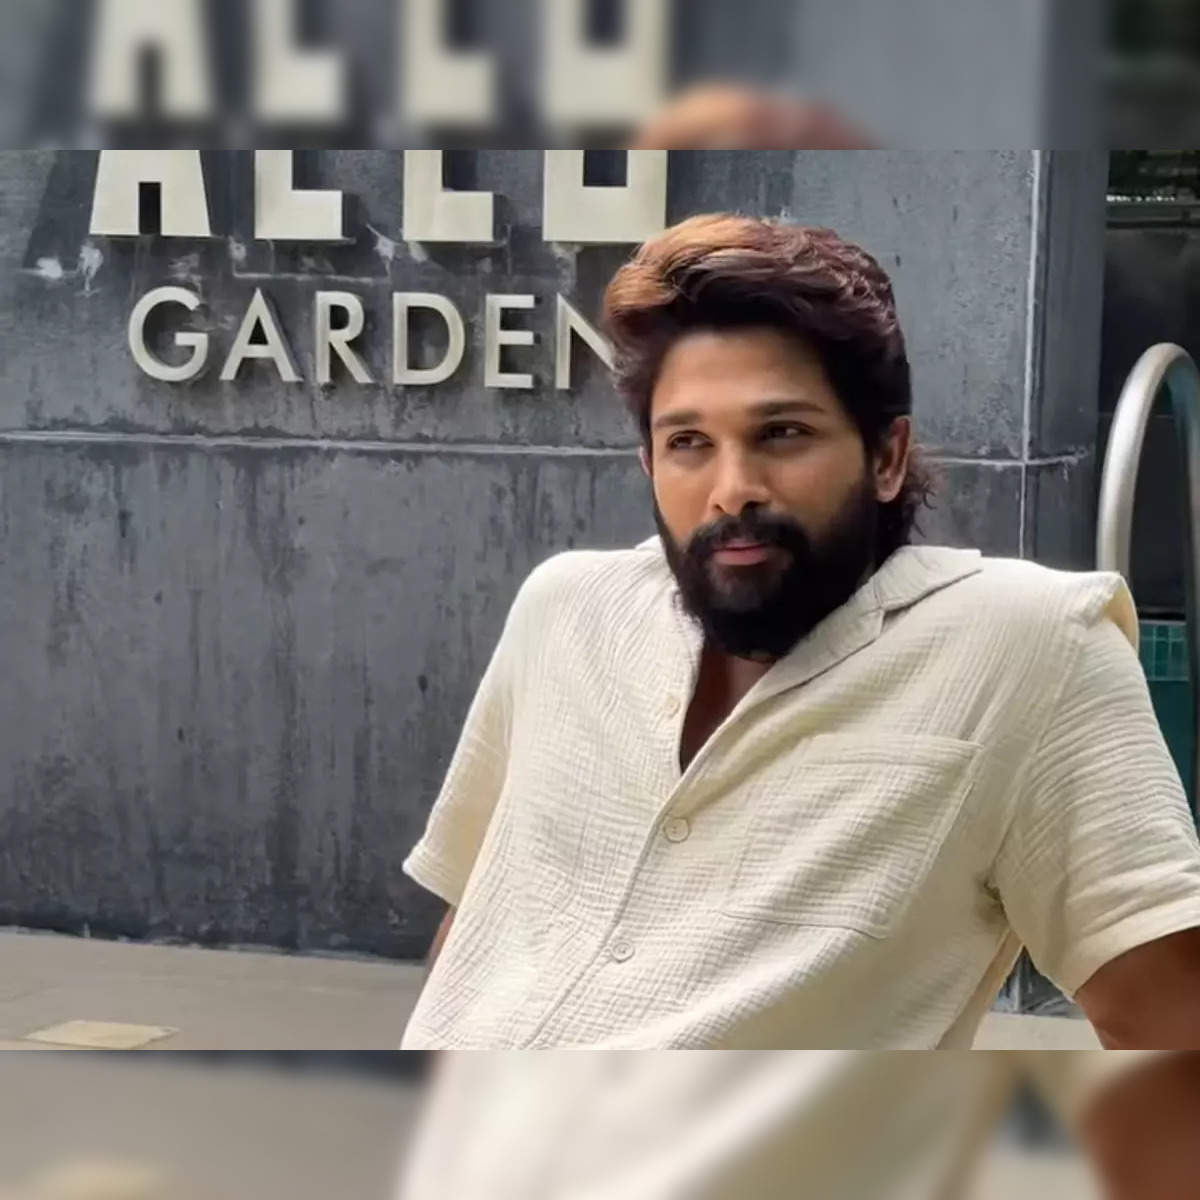 allu arjun: From morning routine to shooting for 'Pushpa 2', National  Award-winning actor Allu Arjun's days are pretty packed - The Economic Times